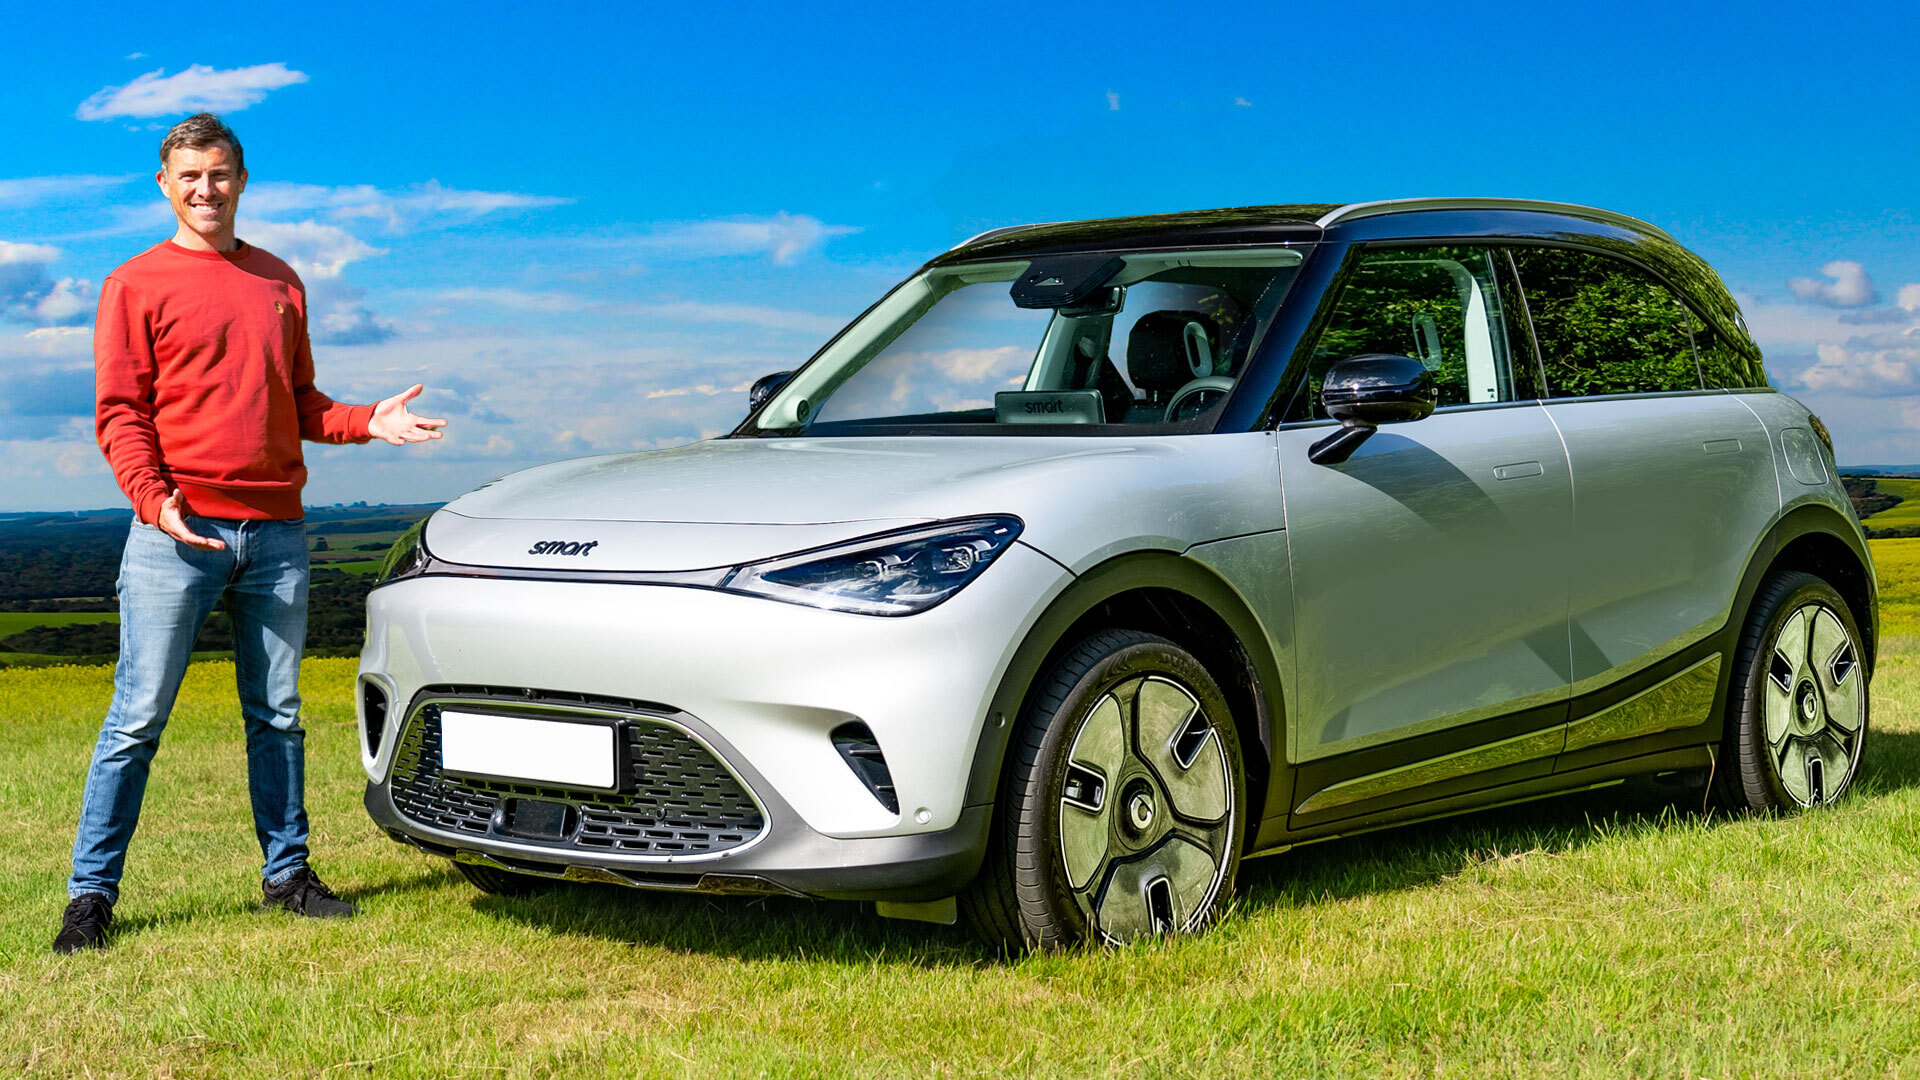 FIRST DRIVE: Smart #1 electric hatchback SUV. Surprise of the year?